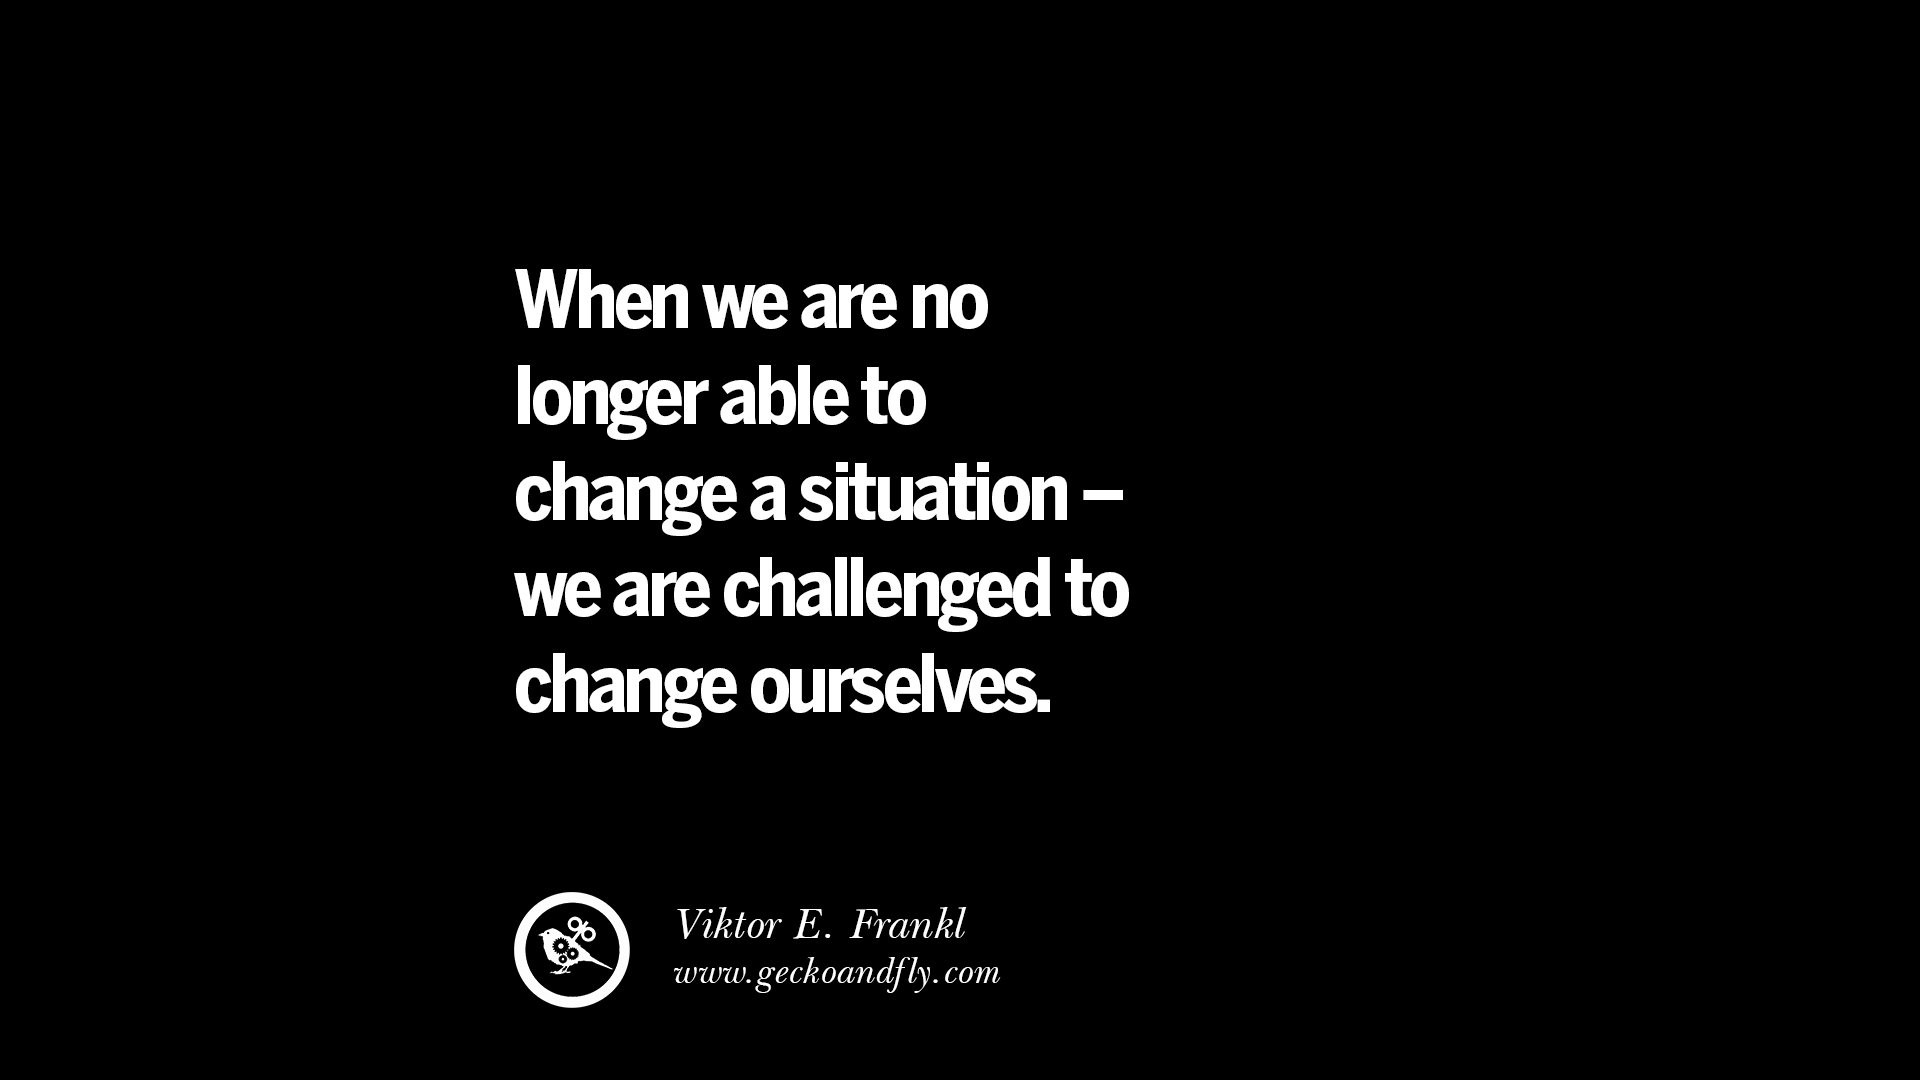 Motivational Quote For Change
 50 Inspiring Quotes Change Motivate Your Life Today